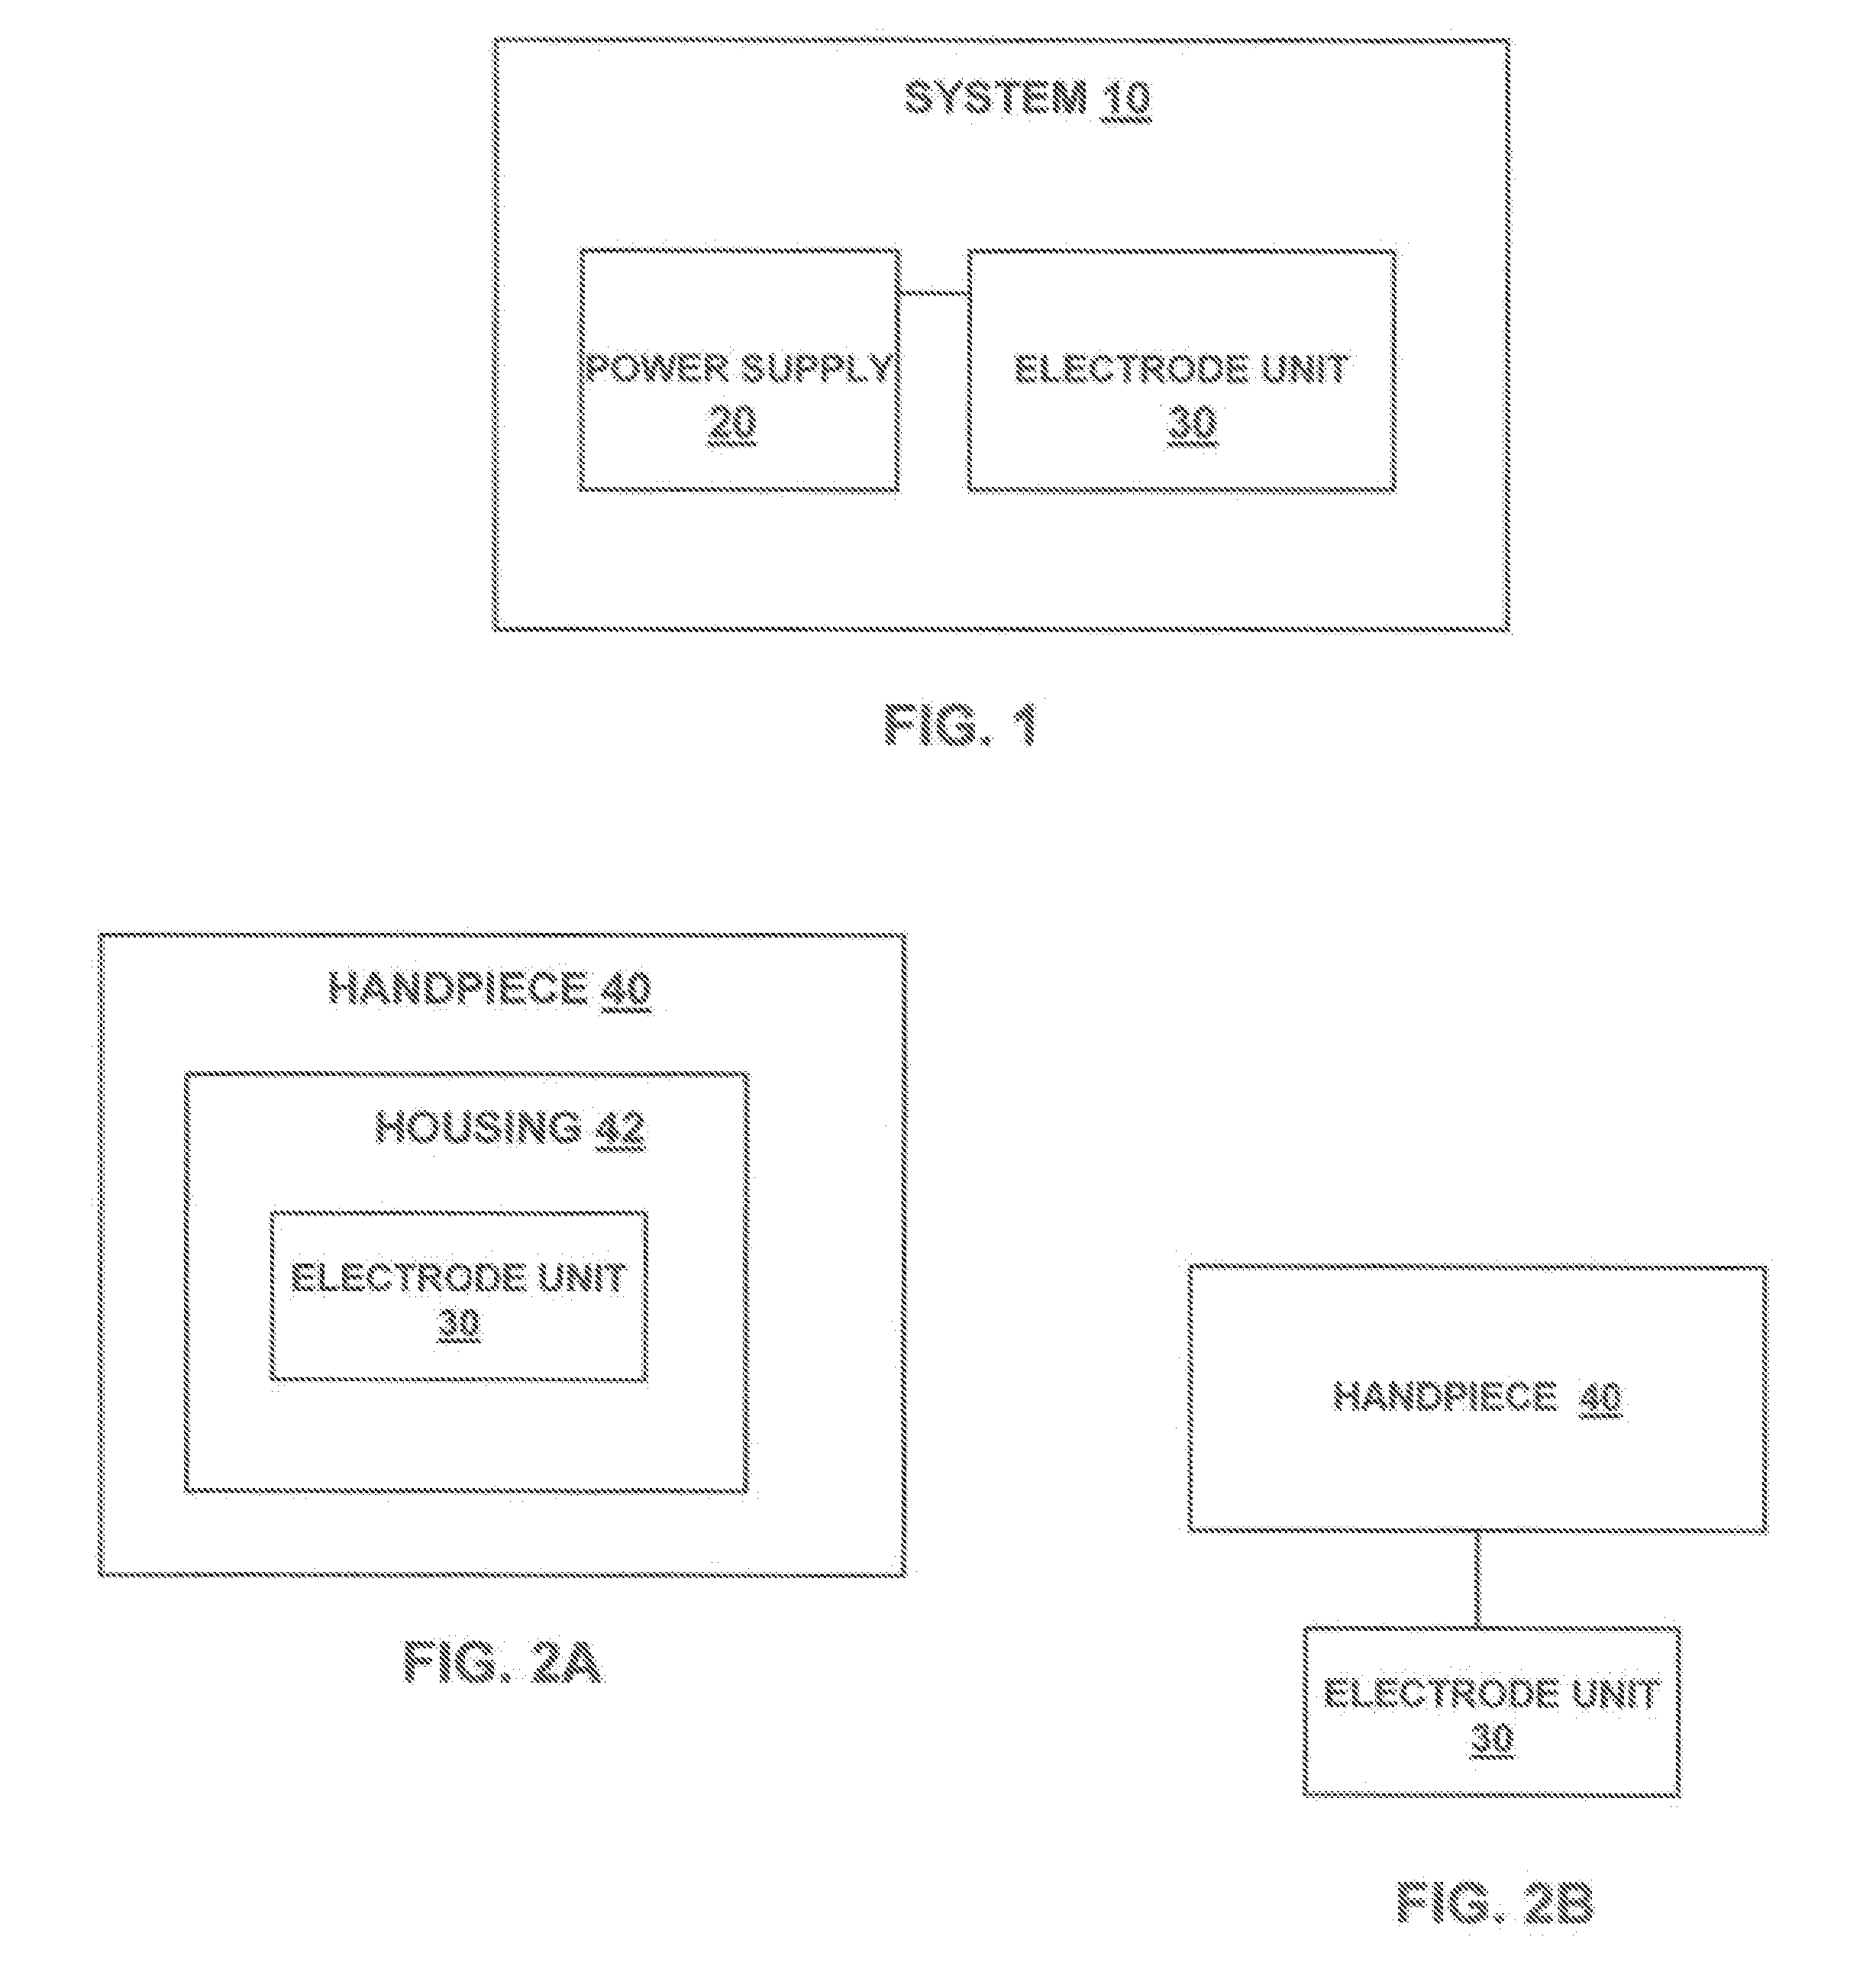 Apparatus and methods for selective heating of tissue